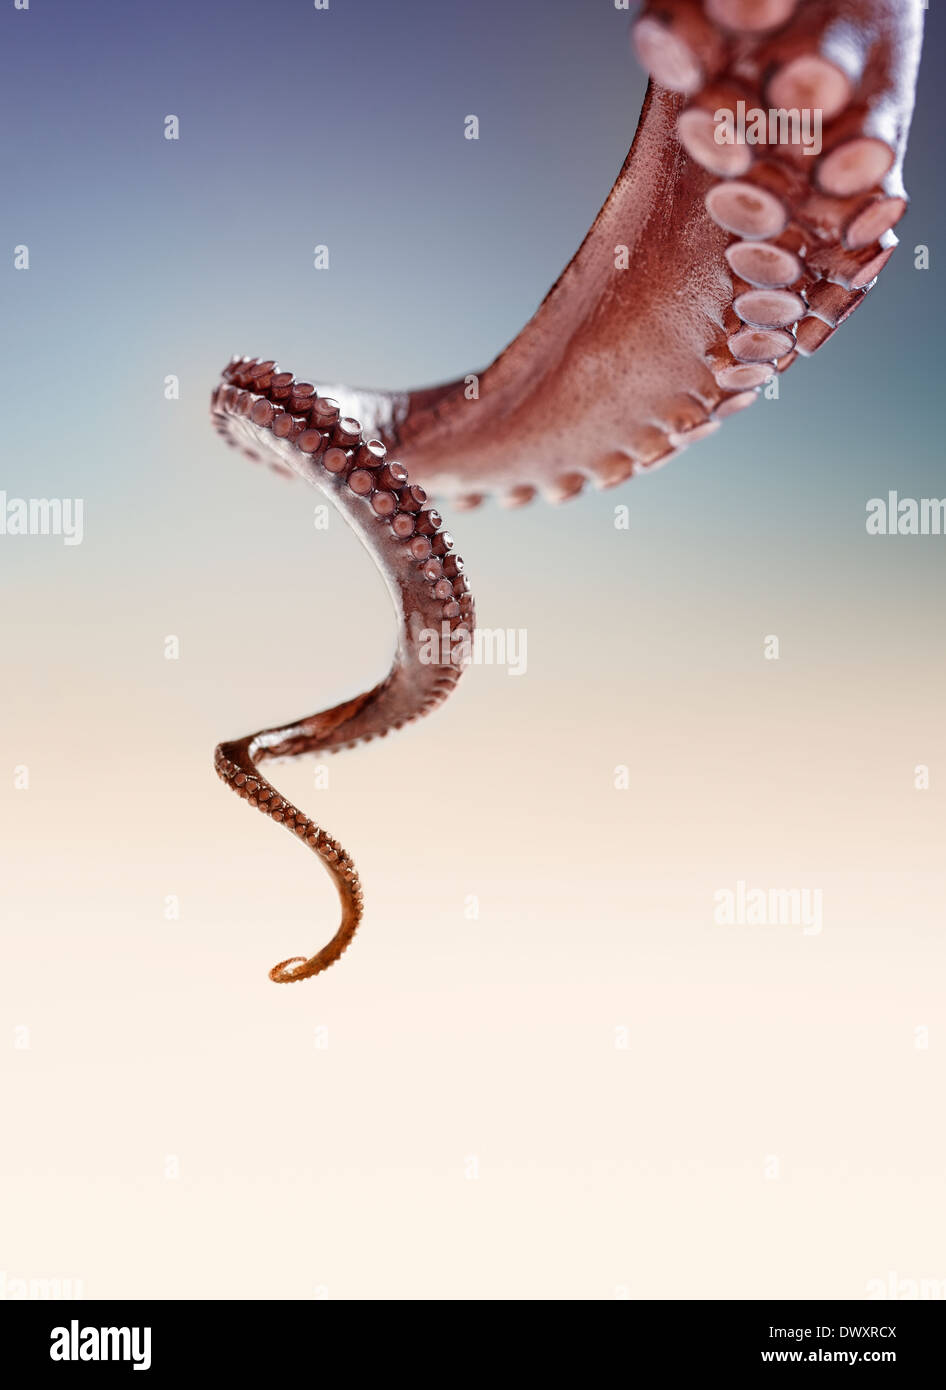 Close-up of a turning octopus tentacle on a gradient background. Stock Photo